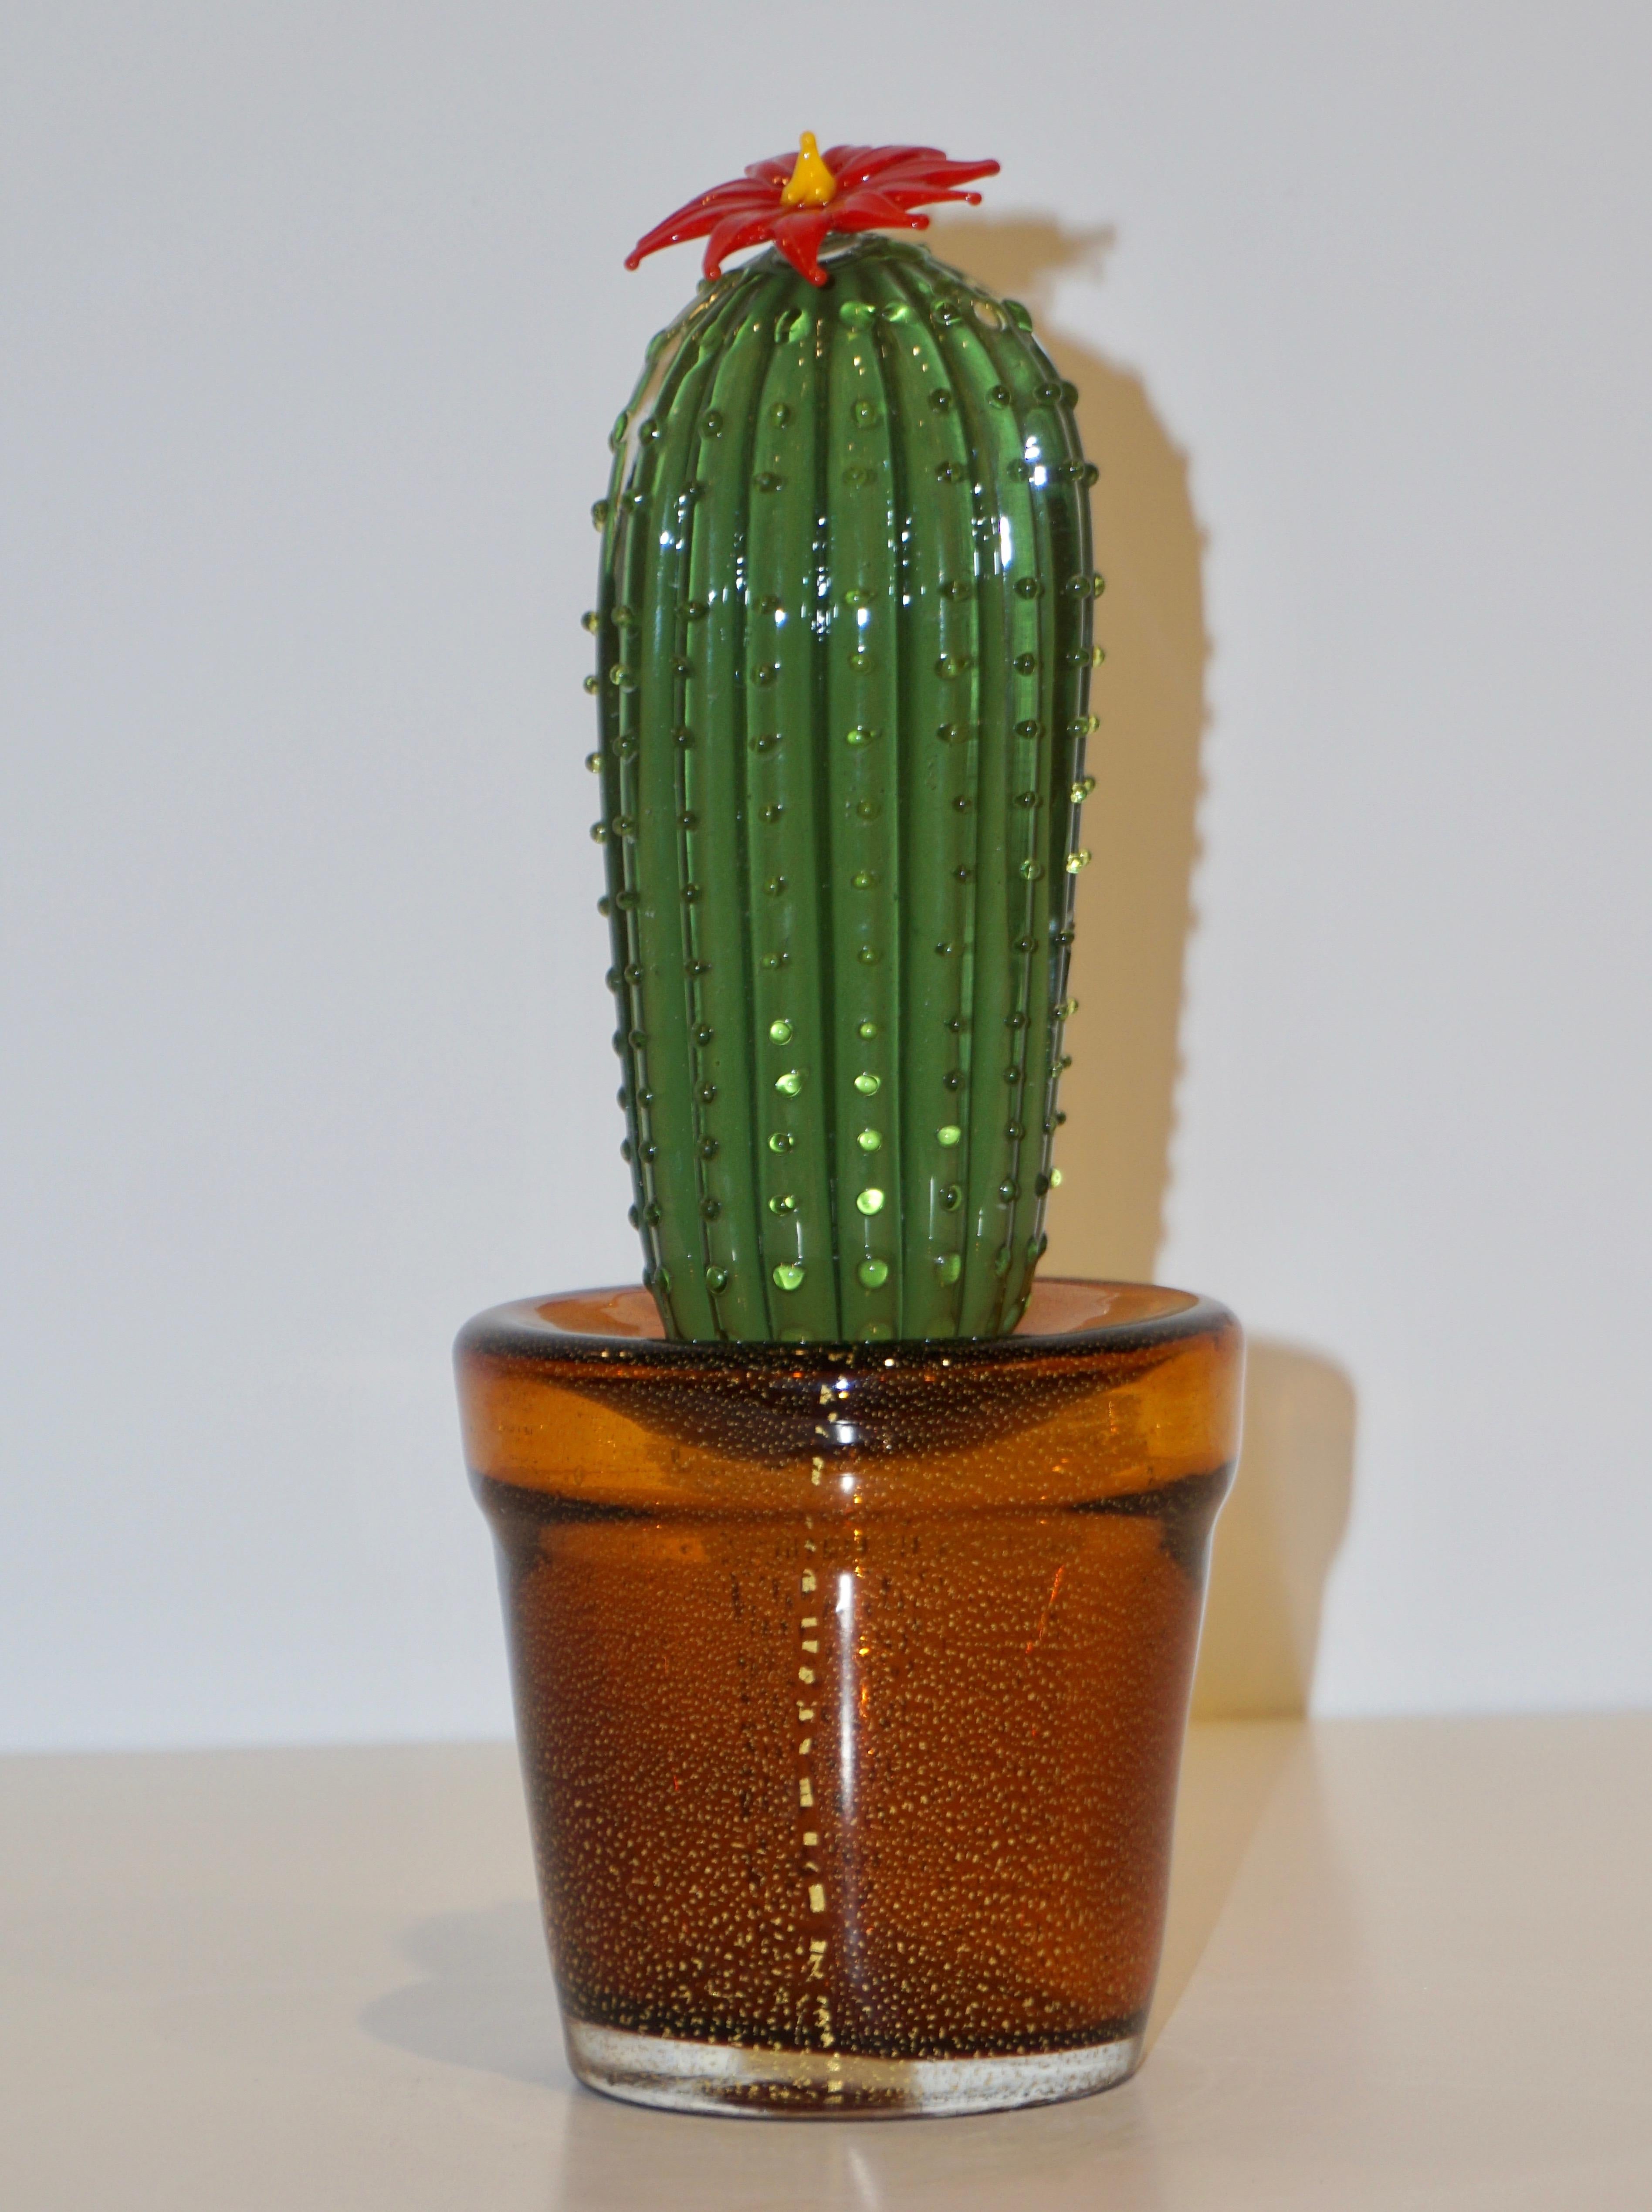 Minimalist 1990s Vintage Italian Green Murano Glass Tall Cactus Plant with Red Flower